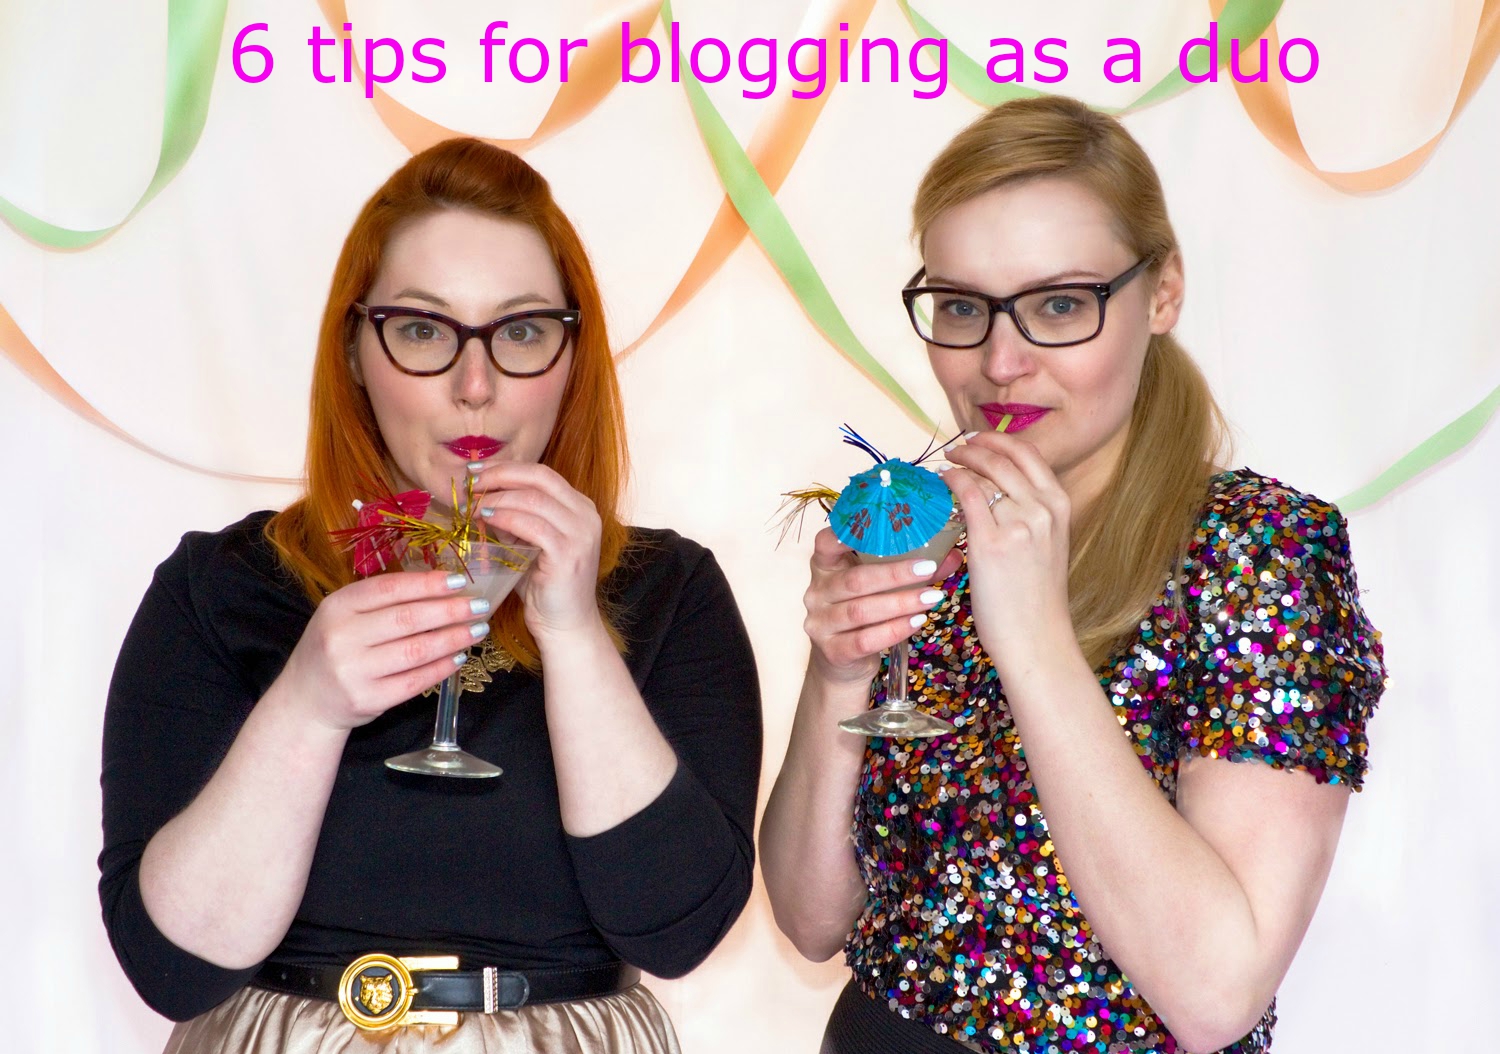 Wardrobe Conversations, blogging duo, blogging tips, award winning, scottish bloggers, cocktails, sequins, party dresses, how to, fashion stylist